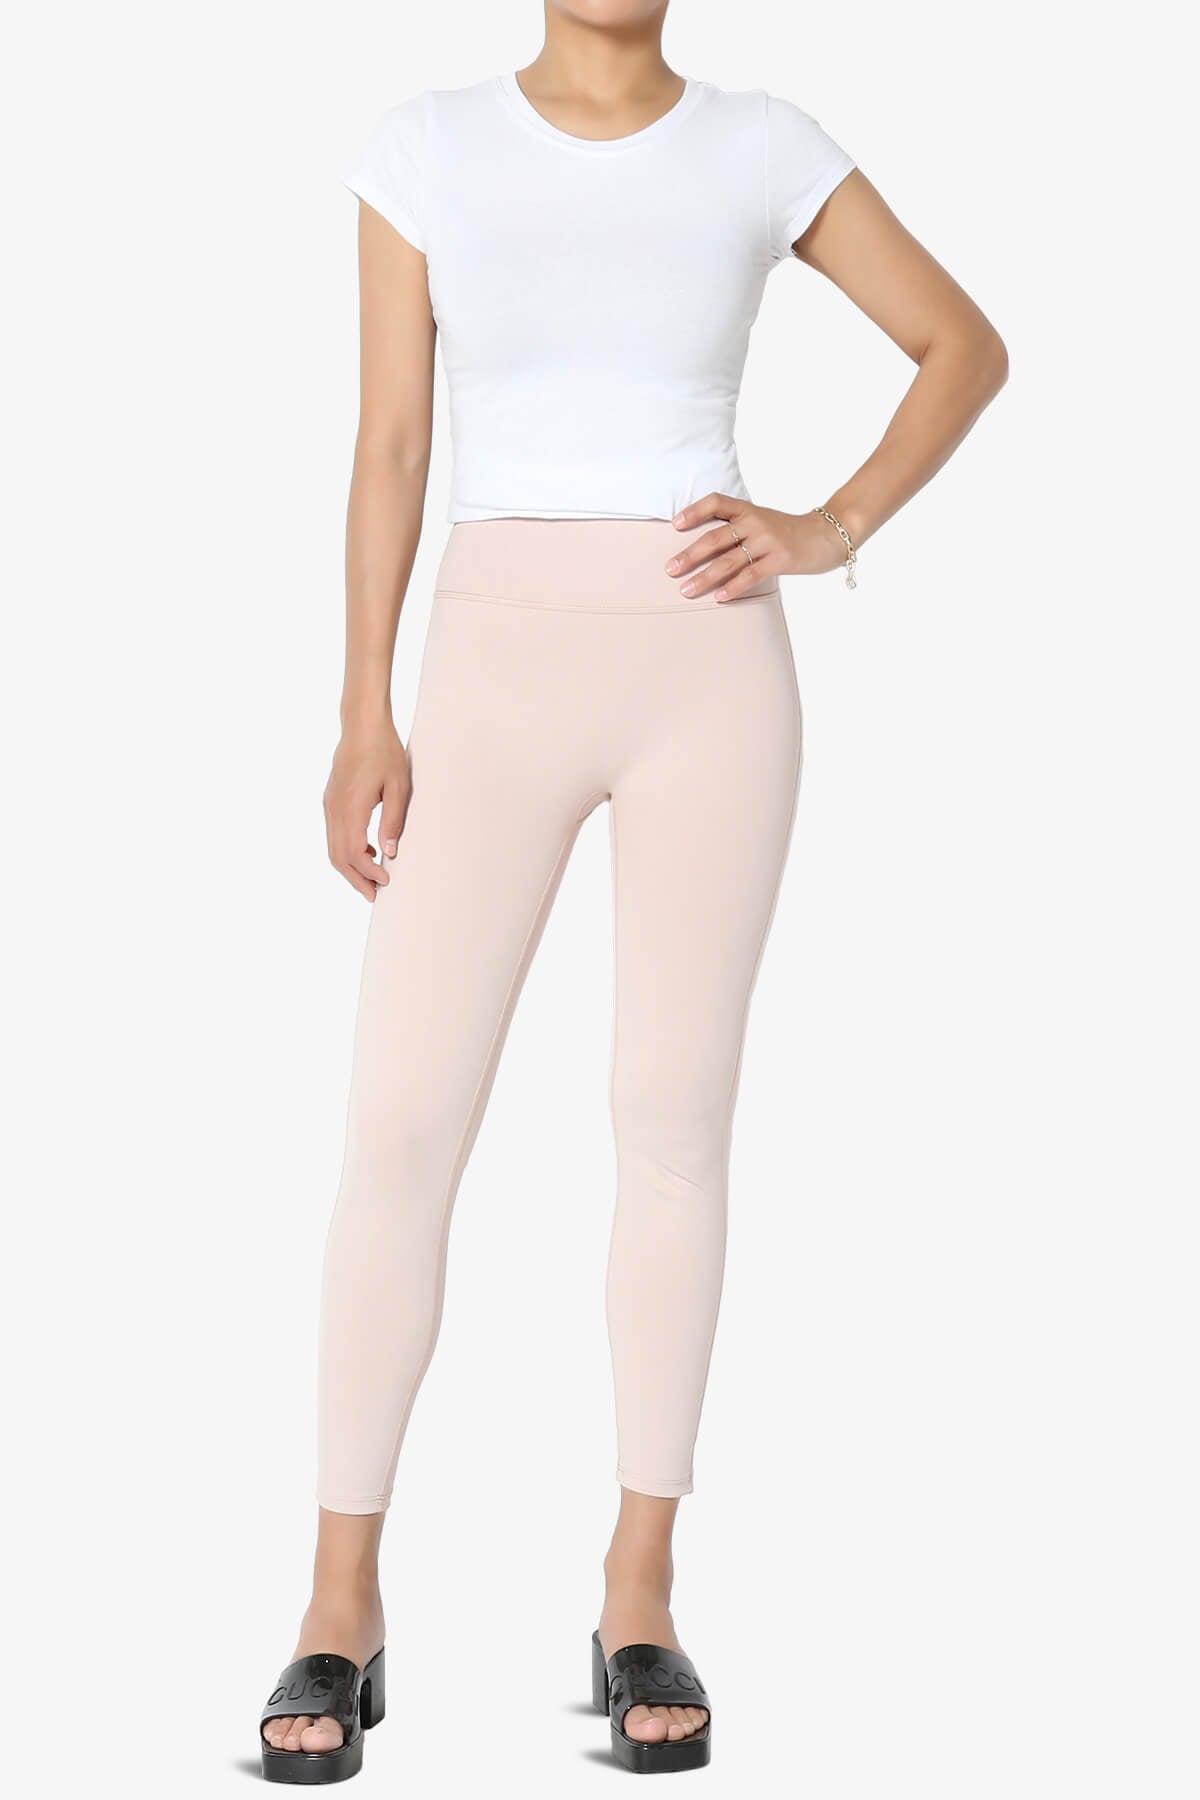 Deals of The Day!TopLLC Workout Leggings Womens Lady Strethcy